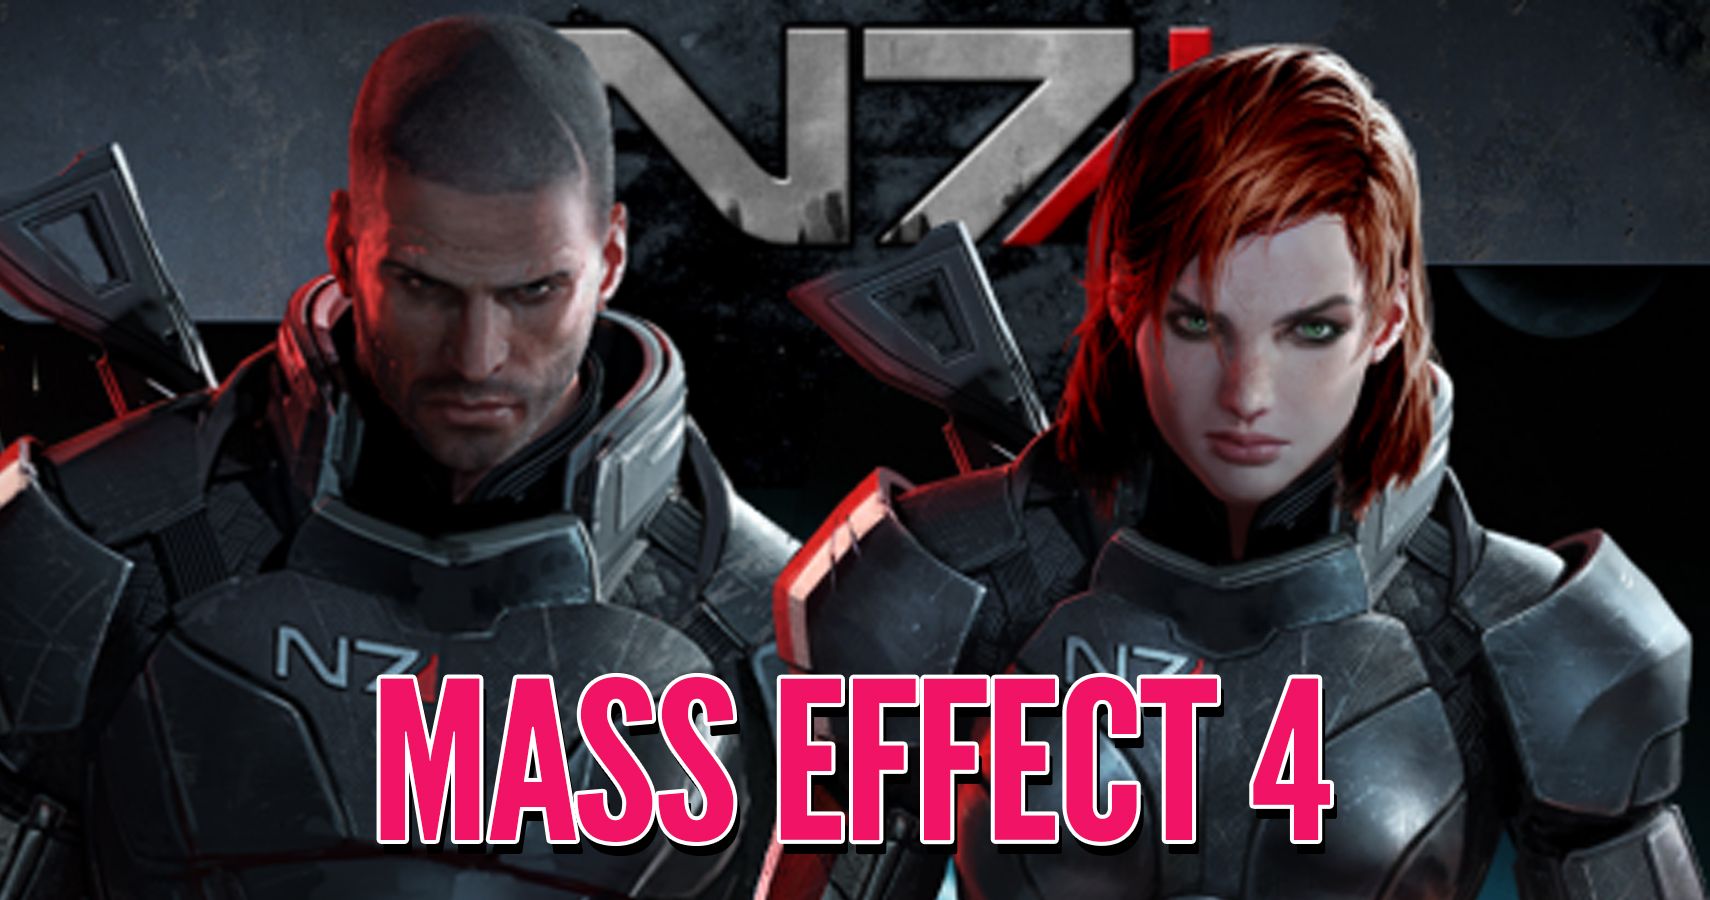 Mass Effect 4 5 Things We Know So Far 5 Crazy Rumors